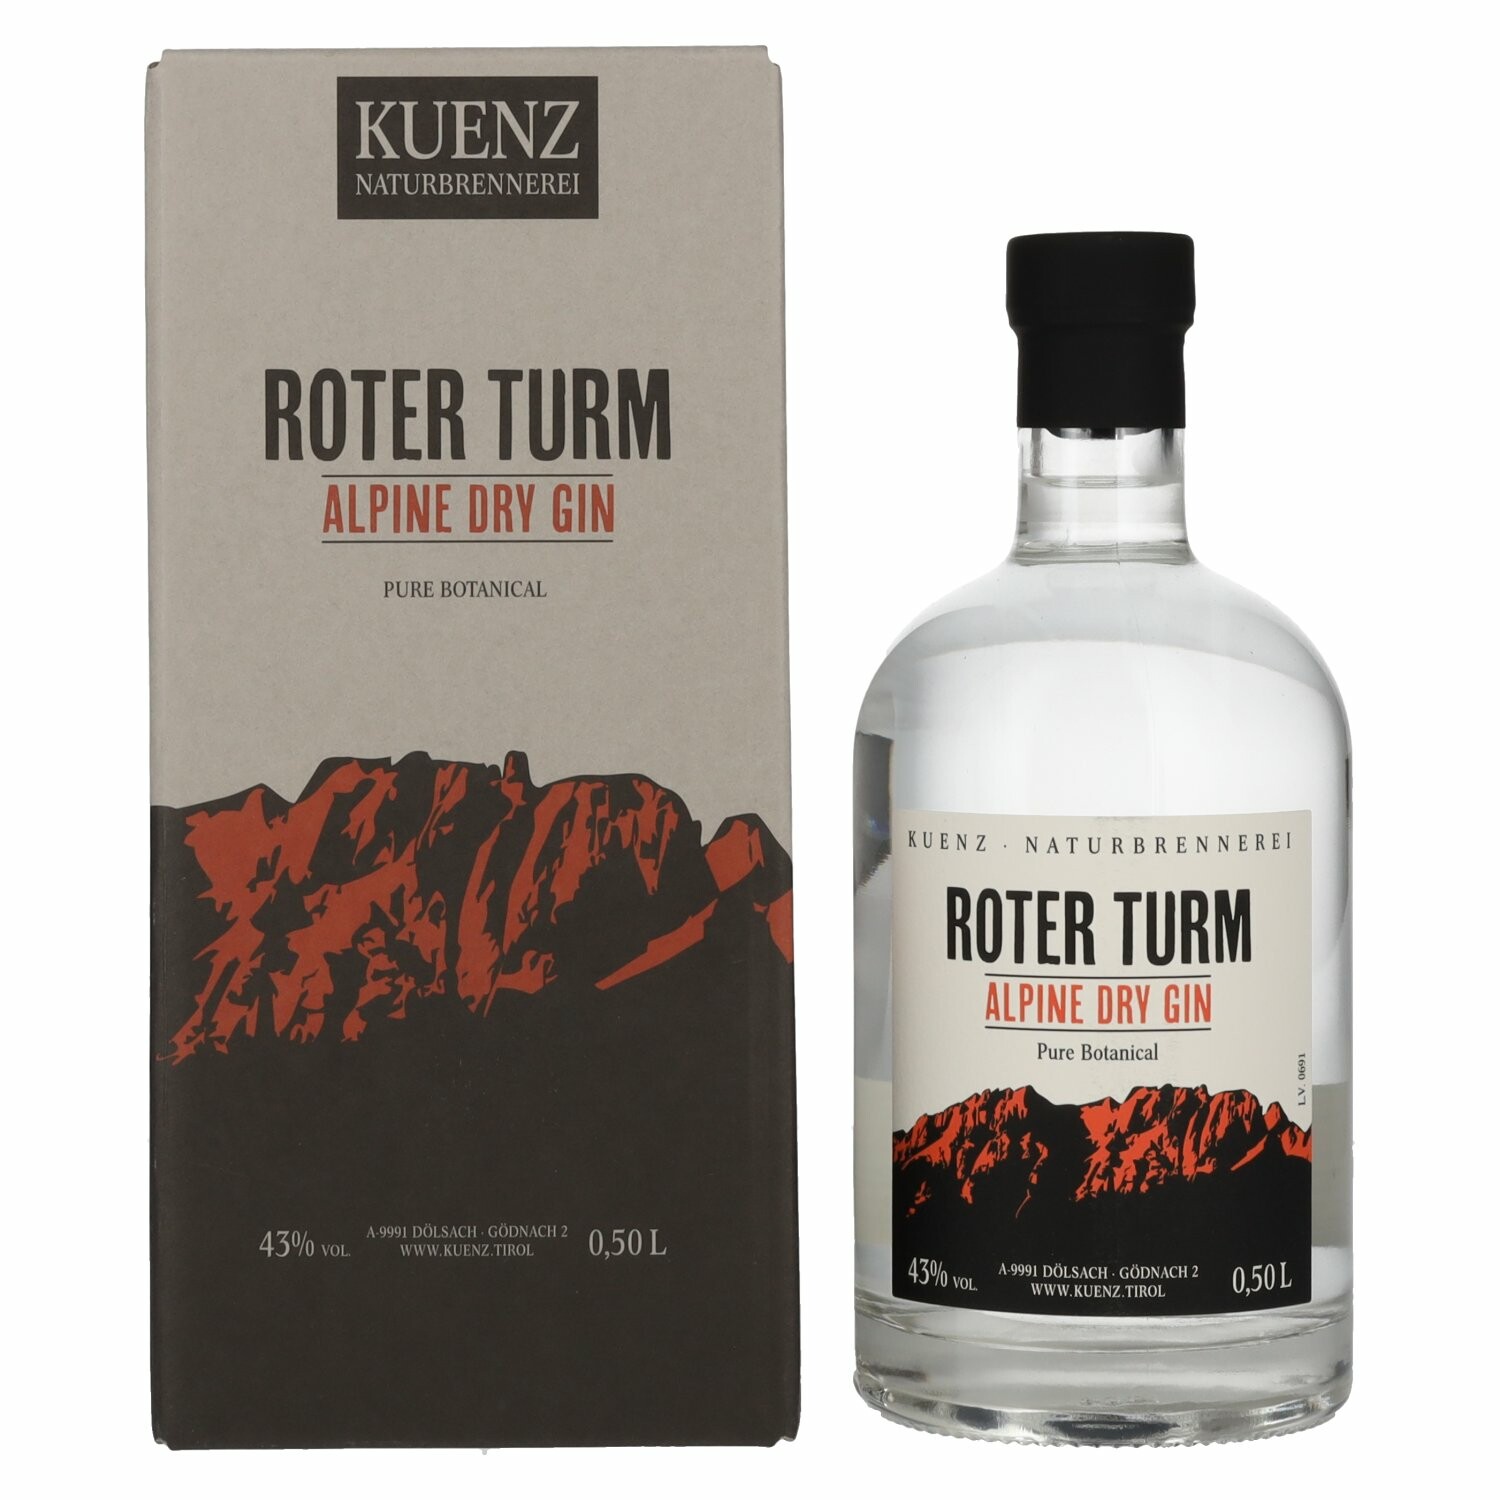 Roter Turm Alpine Dry Gin Pure Botanical 43% Vol. 0,5l in Giftbox